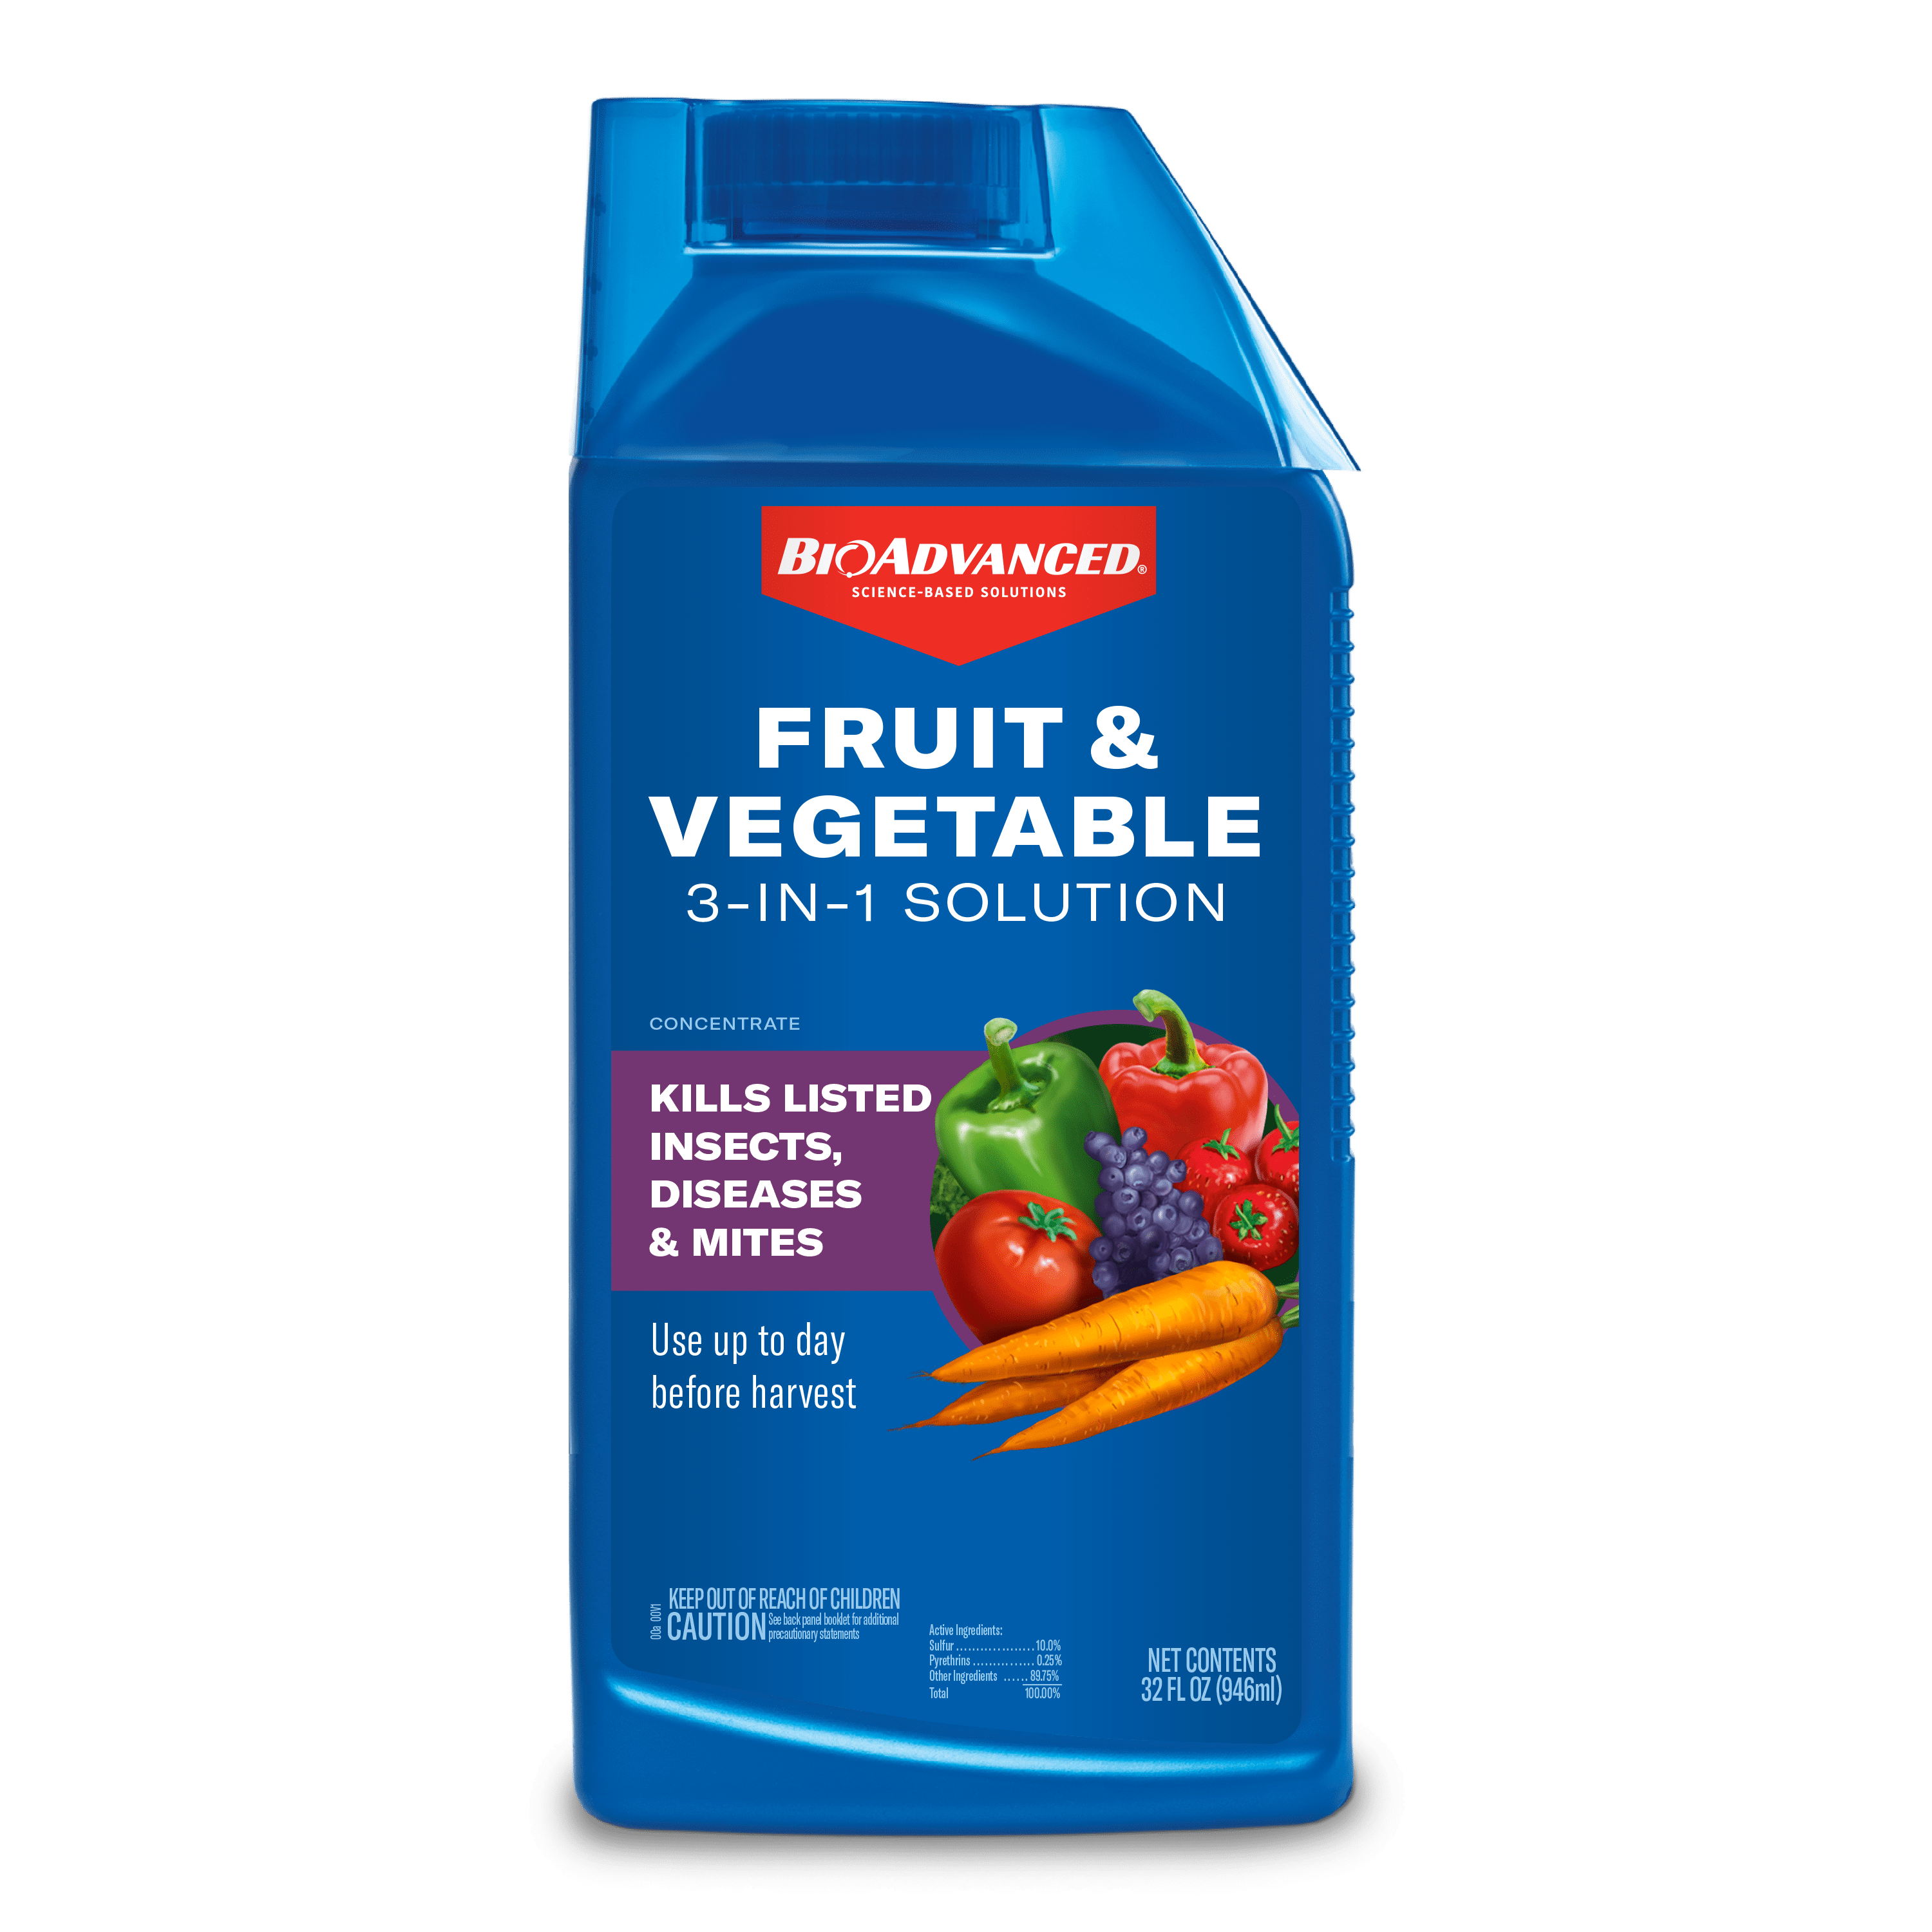 BioAdvanced Fruit & Vegetable 3n1 Solution 32oz Concentrate, Kills Listed Insects: Aphids, Caterpillars, Mites, Beet Armyworms, Beetles and More! Controls; Black Spot, Powdery Mildew, Rust and More!